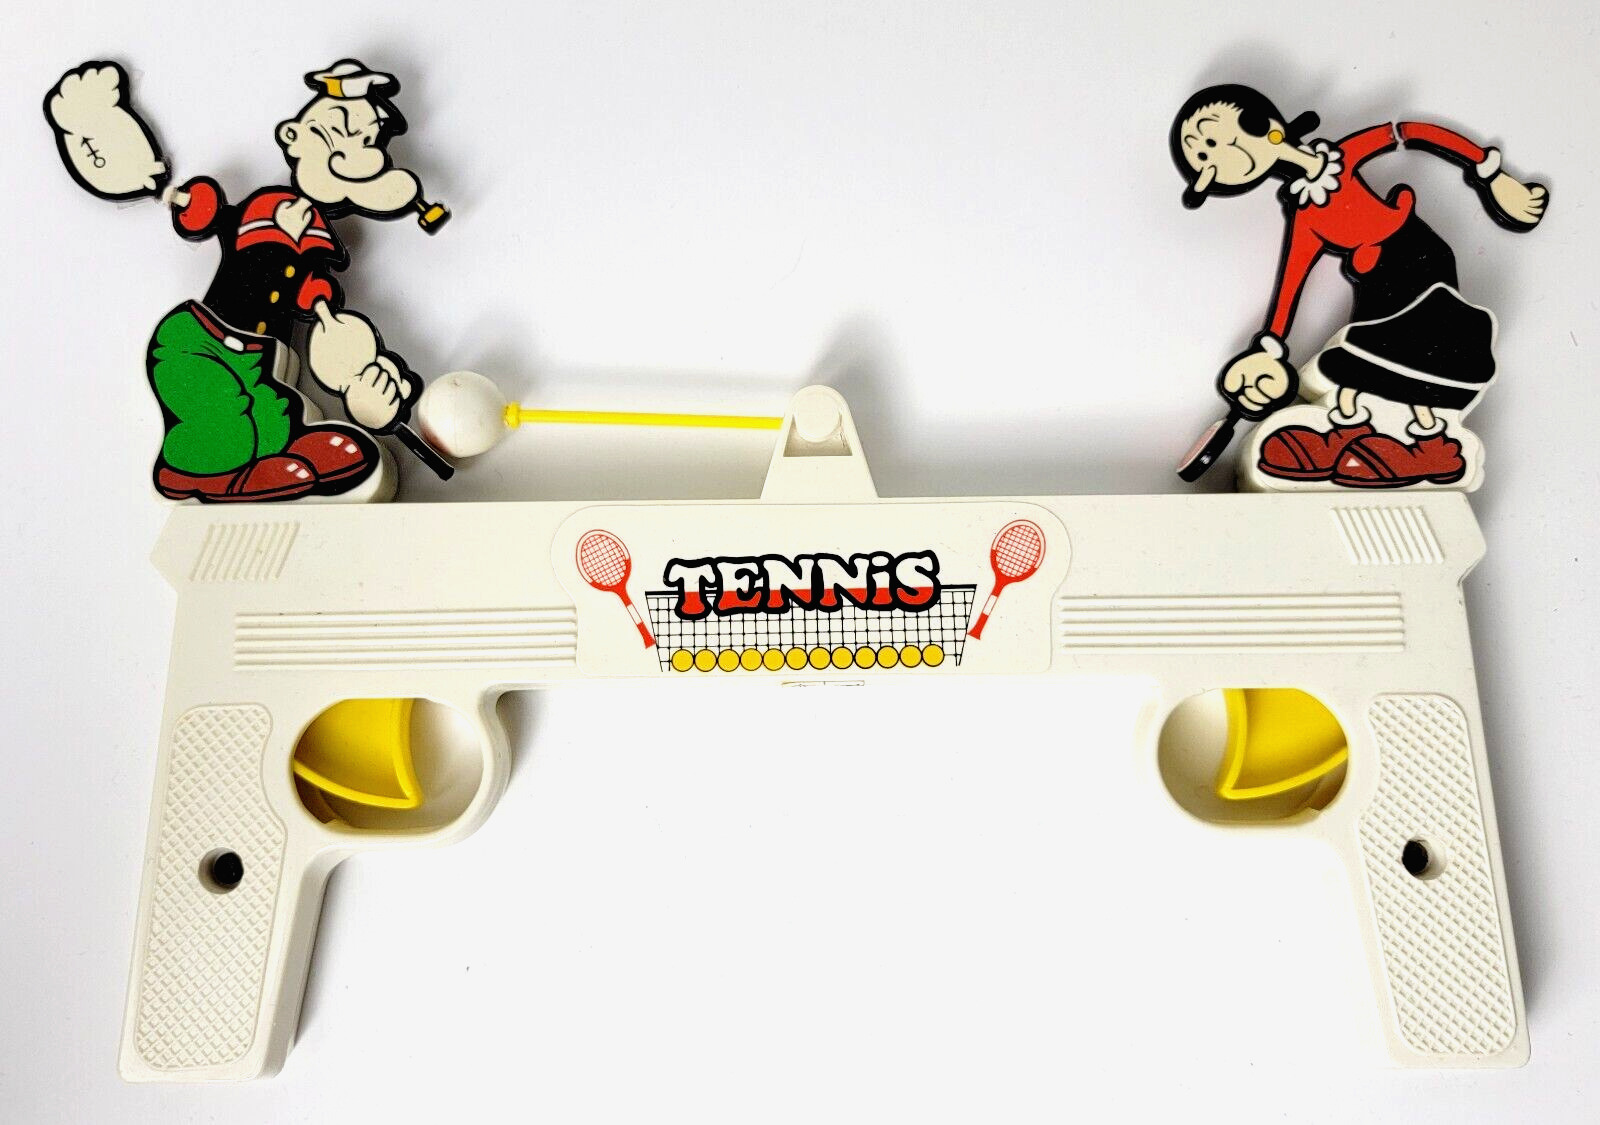 Vintage Popeye the Sailor & Olive Oyl 2 Player Tennis Game Toy  2 Arms Broken